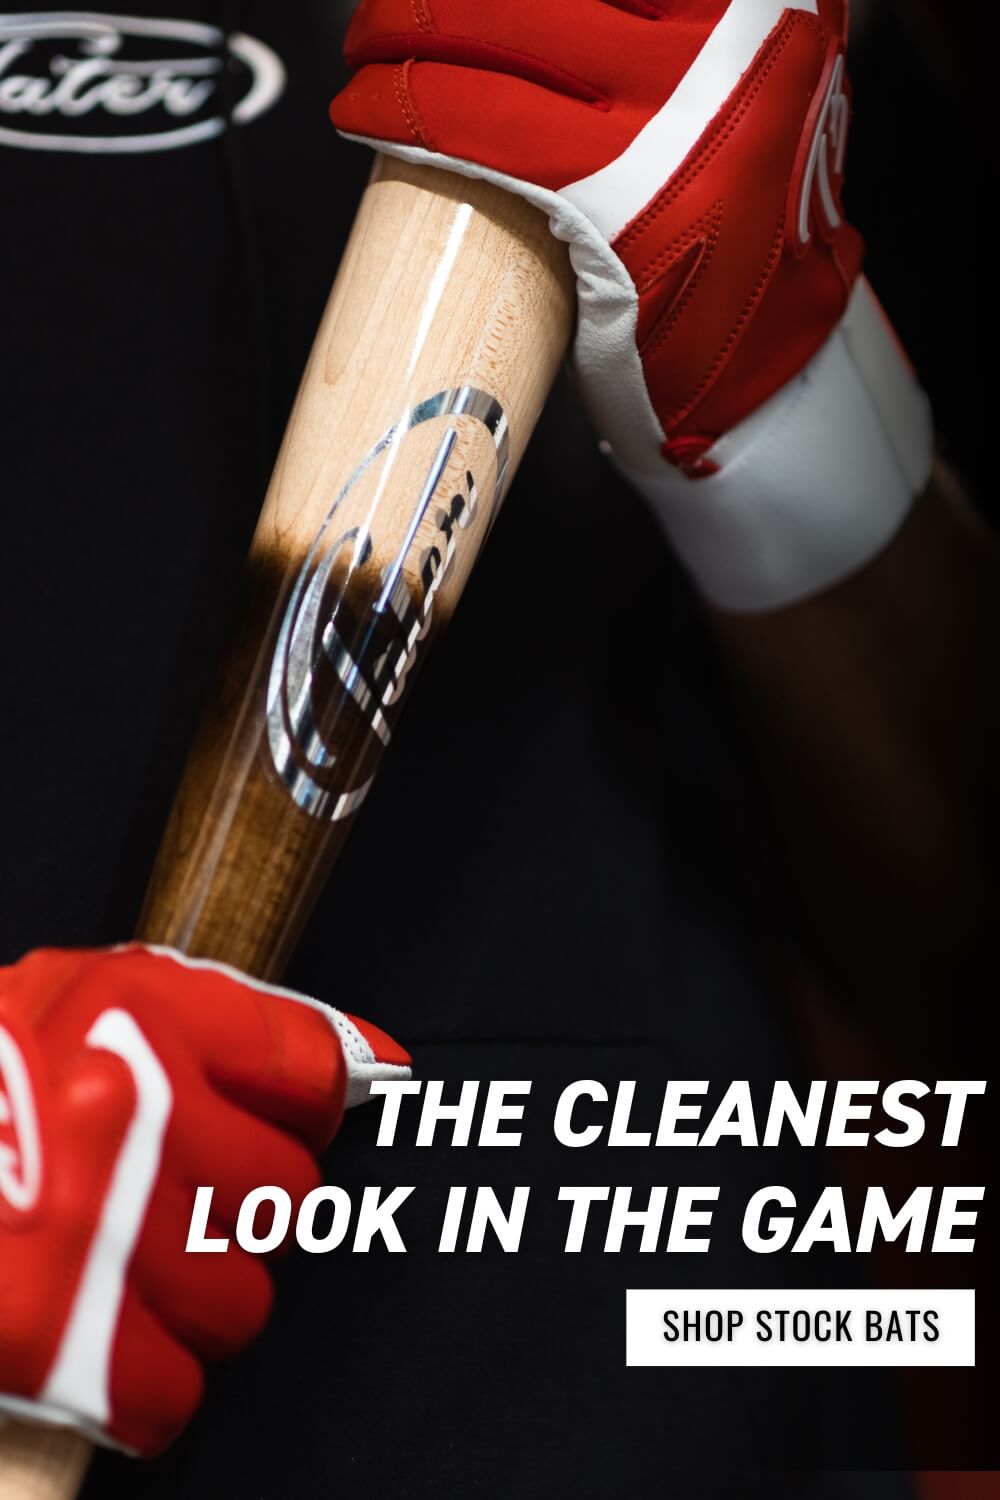 A close-up of a baseball player holding the original pine tar flame bat with a clear focus on the silver Tater logo at the neck of the bat.